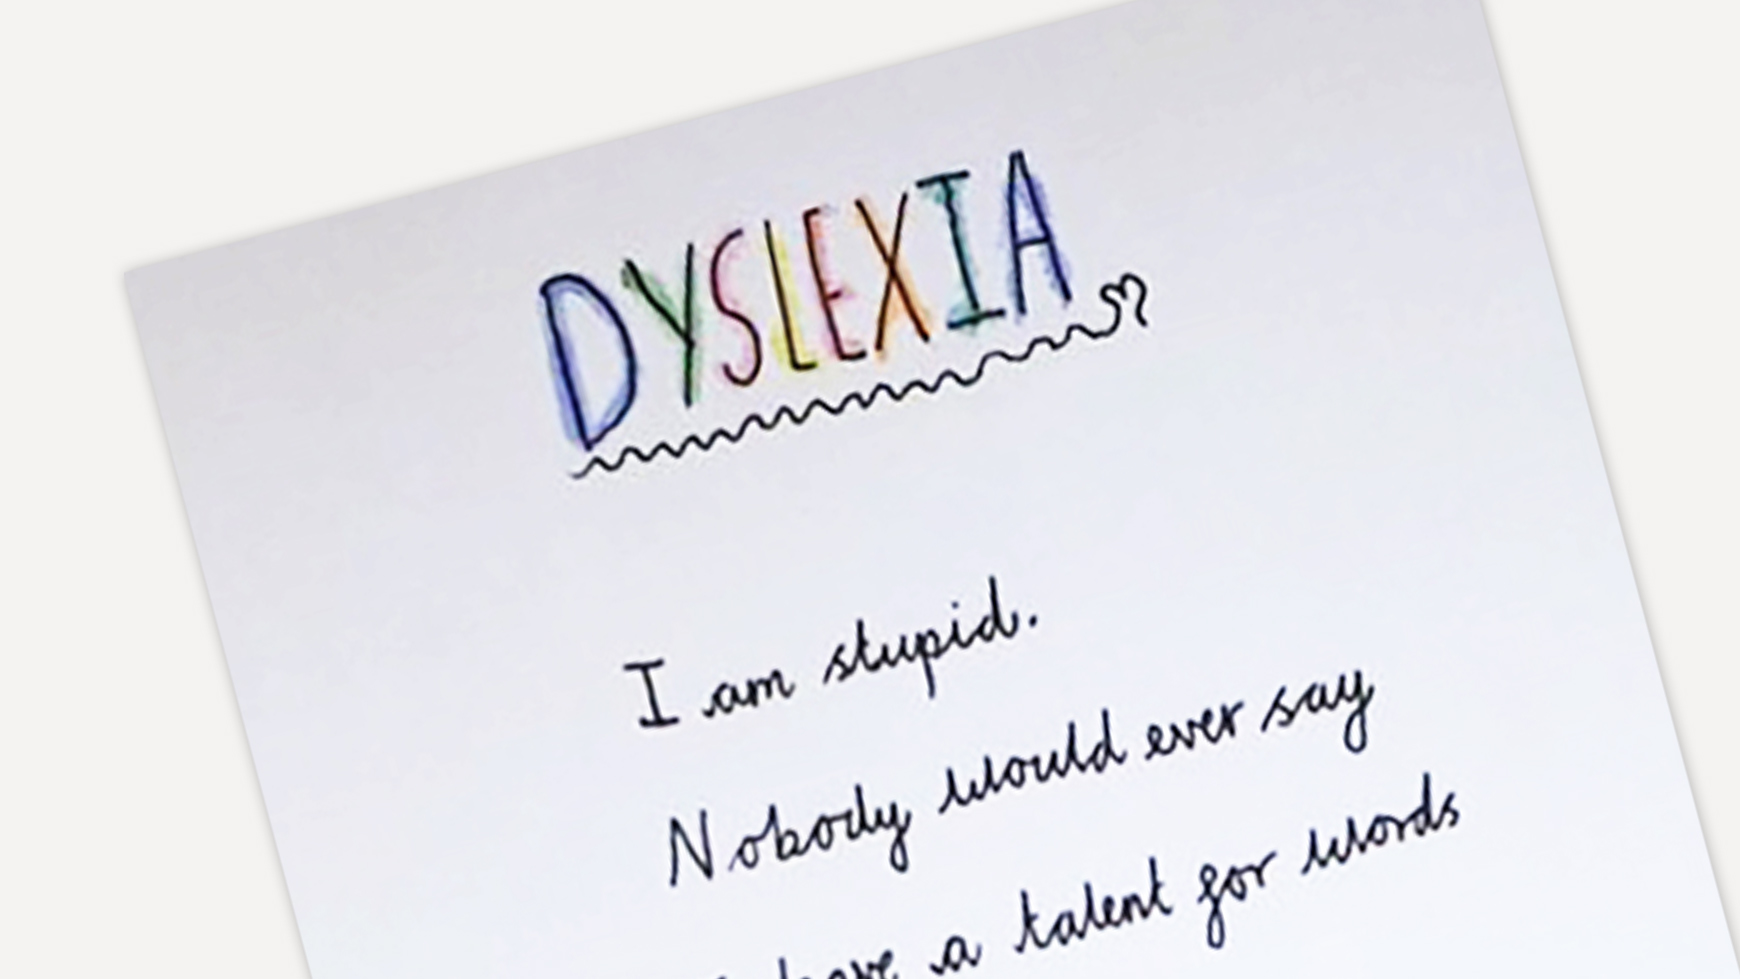 Reverse Poem About Dyslexia Goes Viral  Understood - For learning